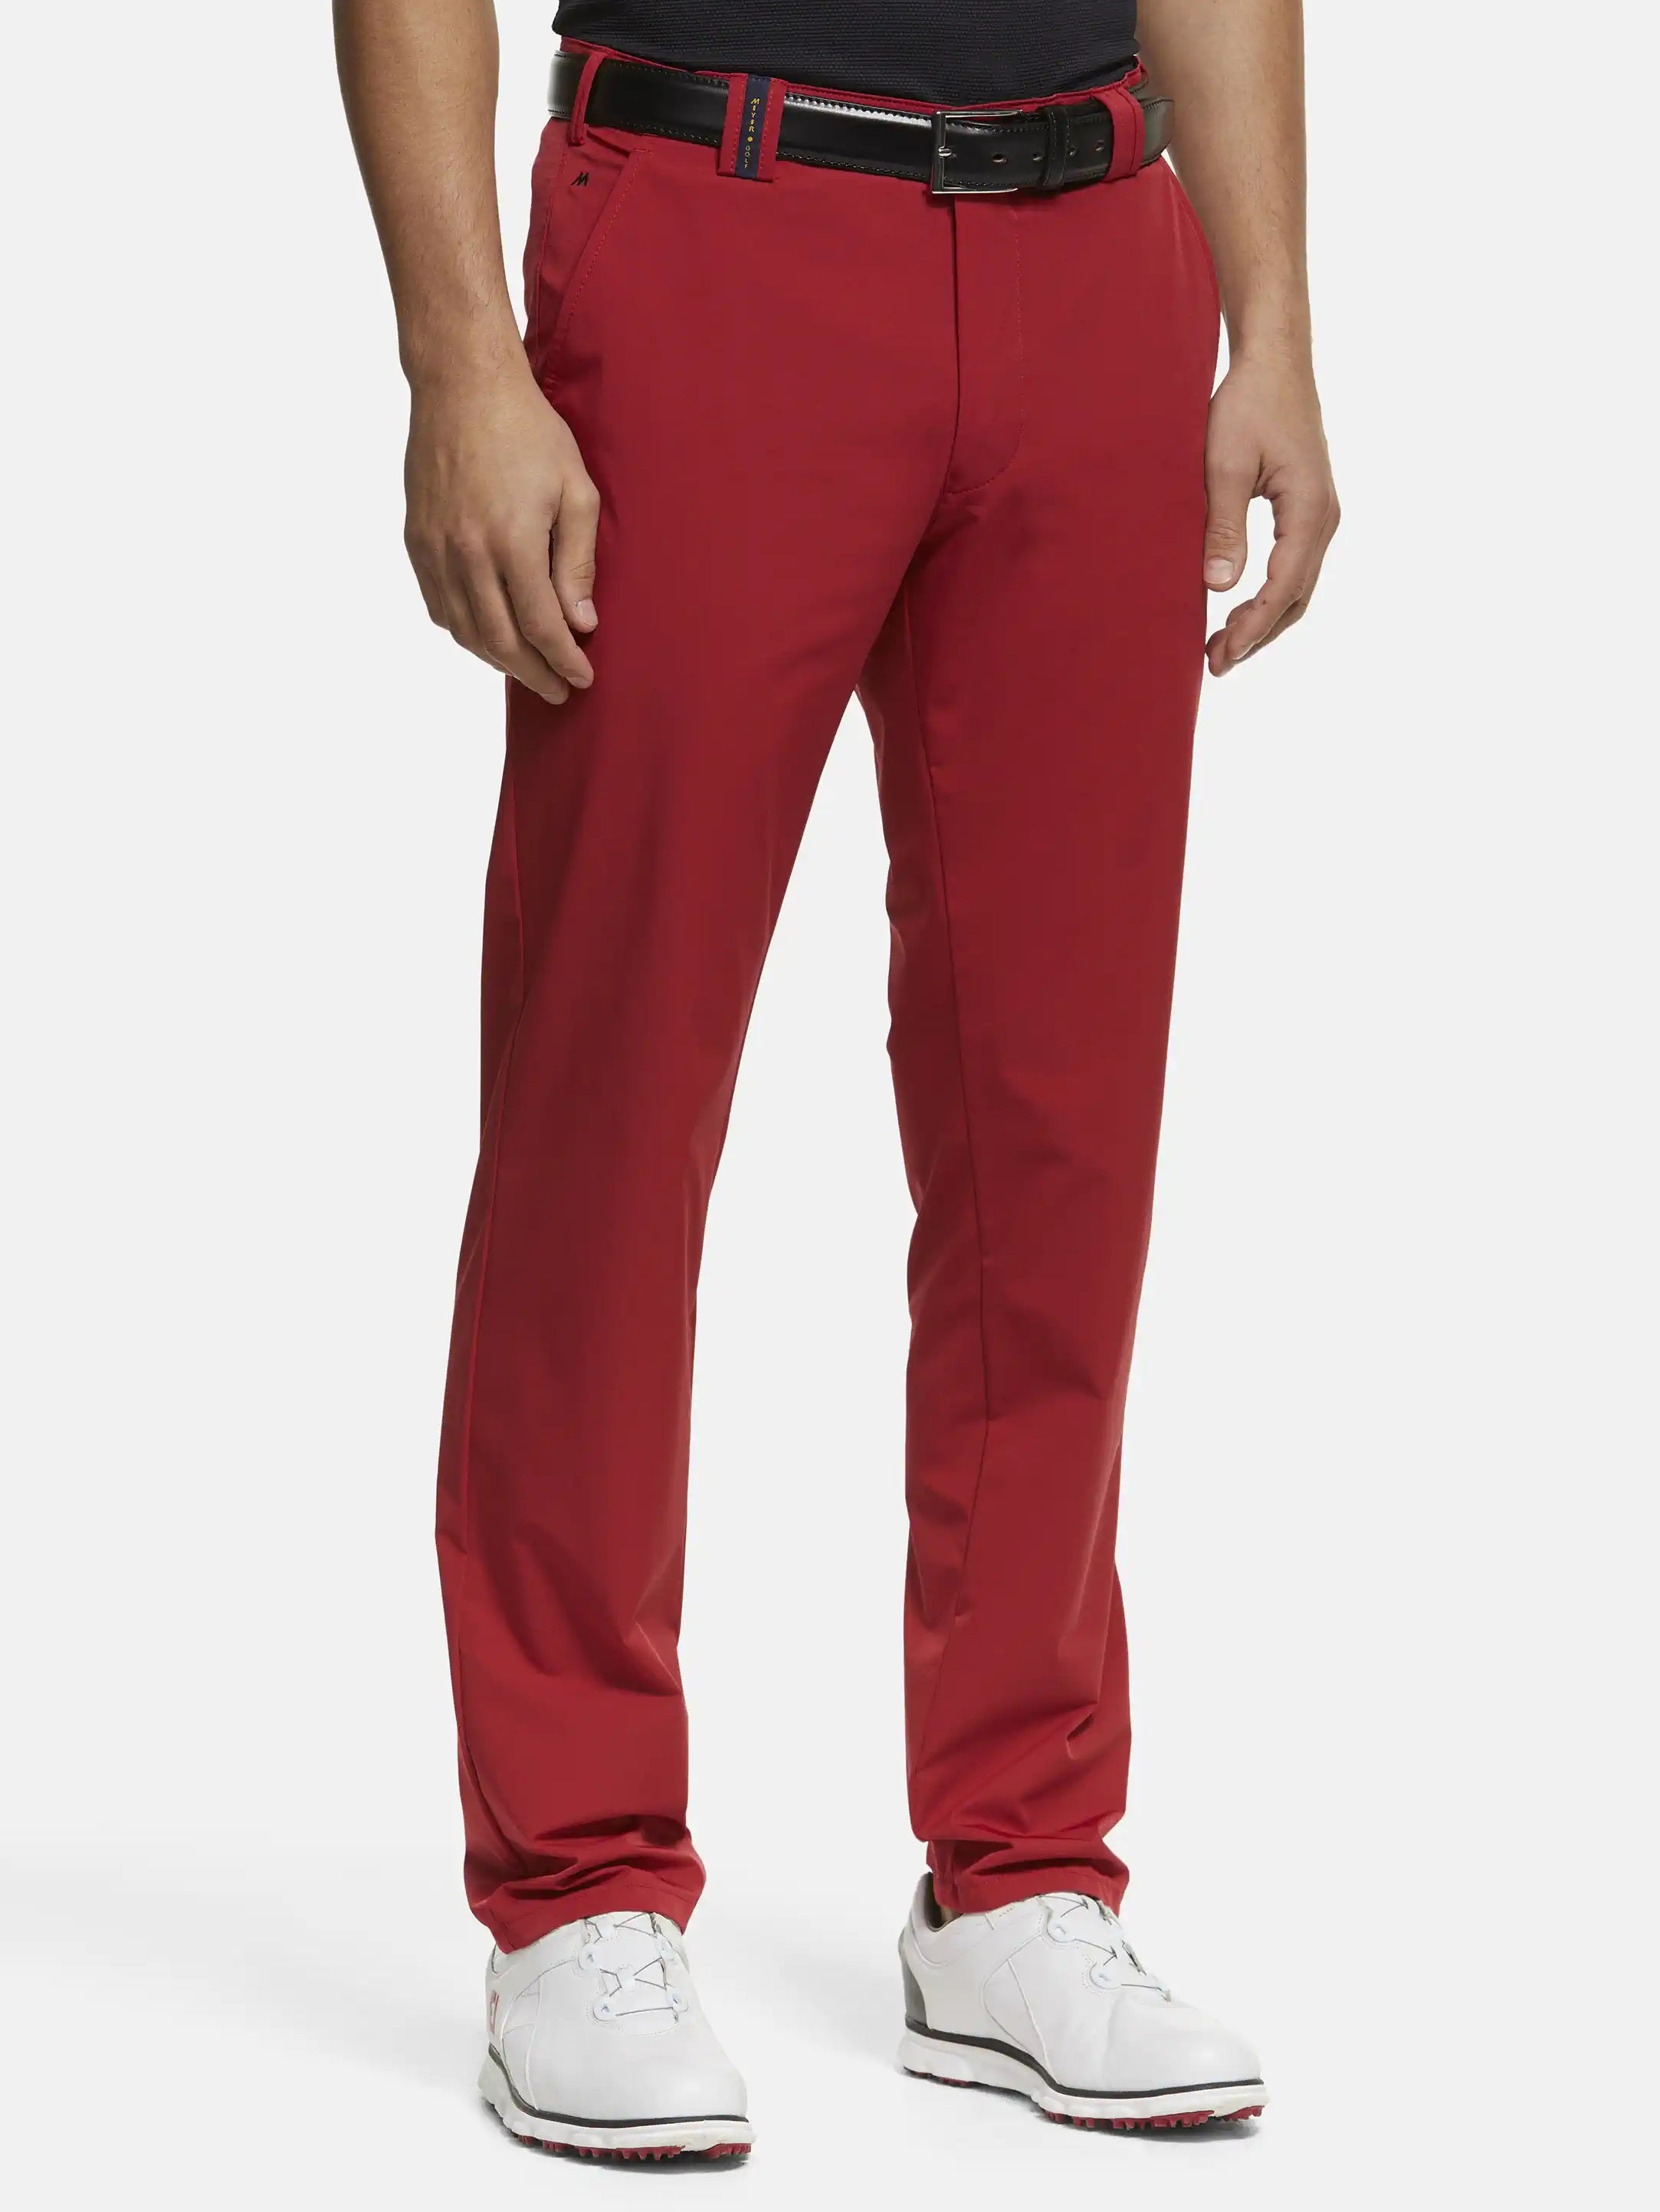 MEYER Golf Trousers - Augusta 8070 High Performance Chinos - Red